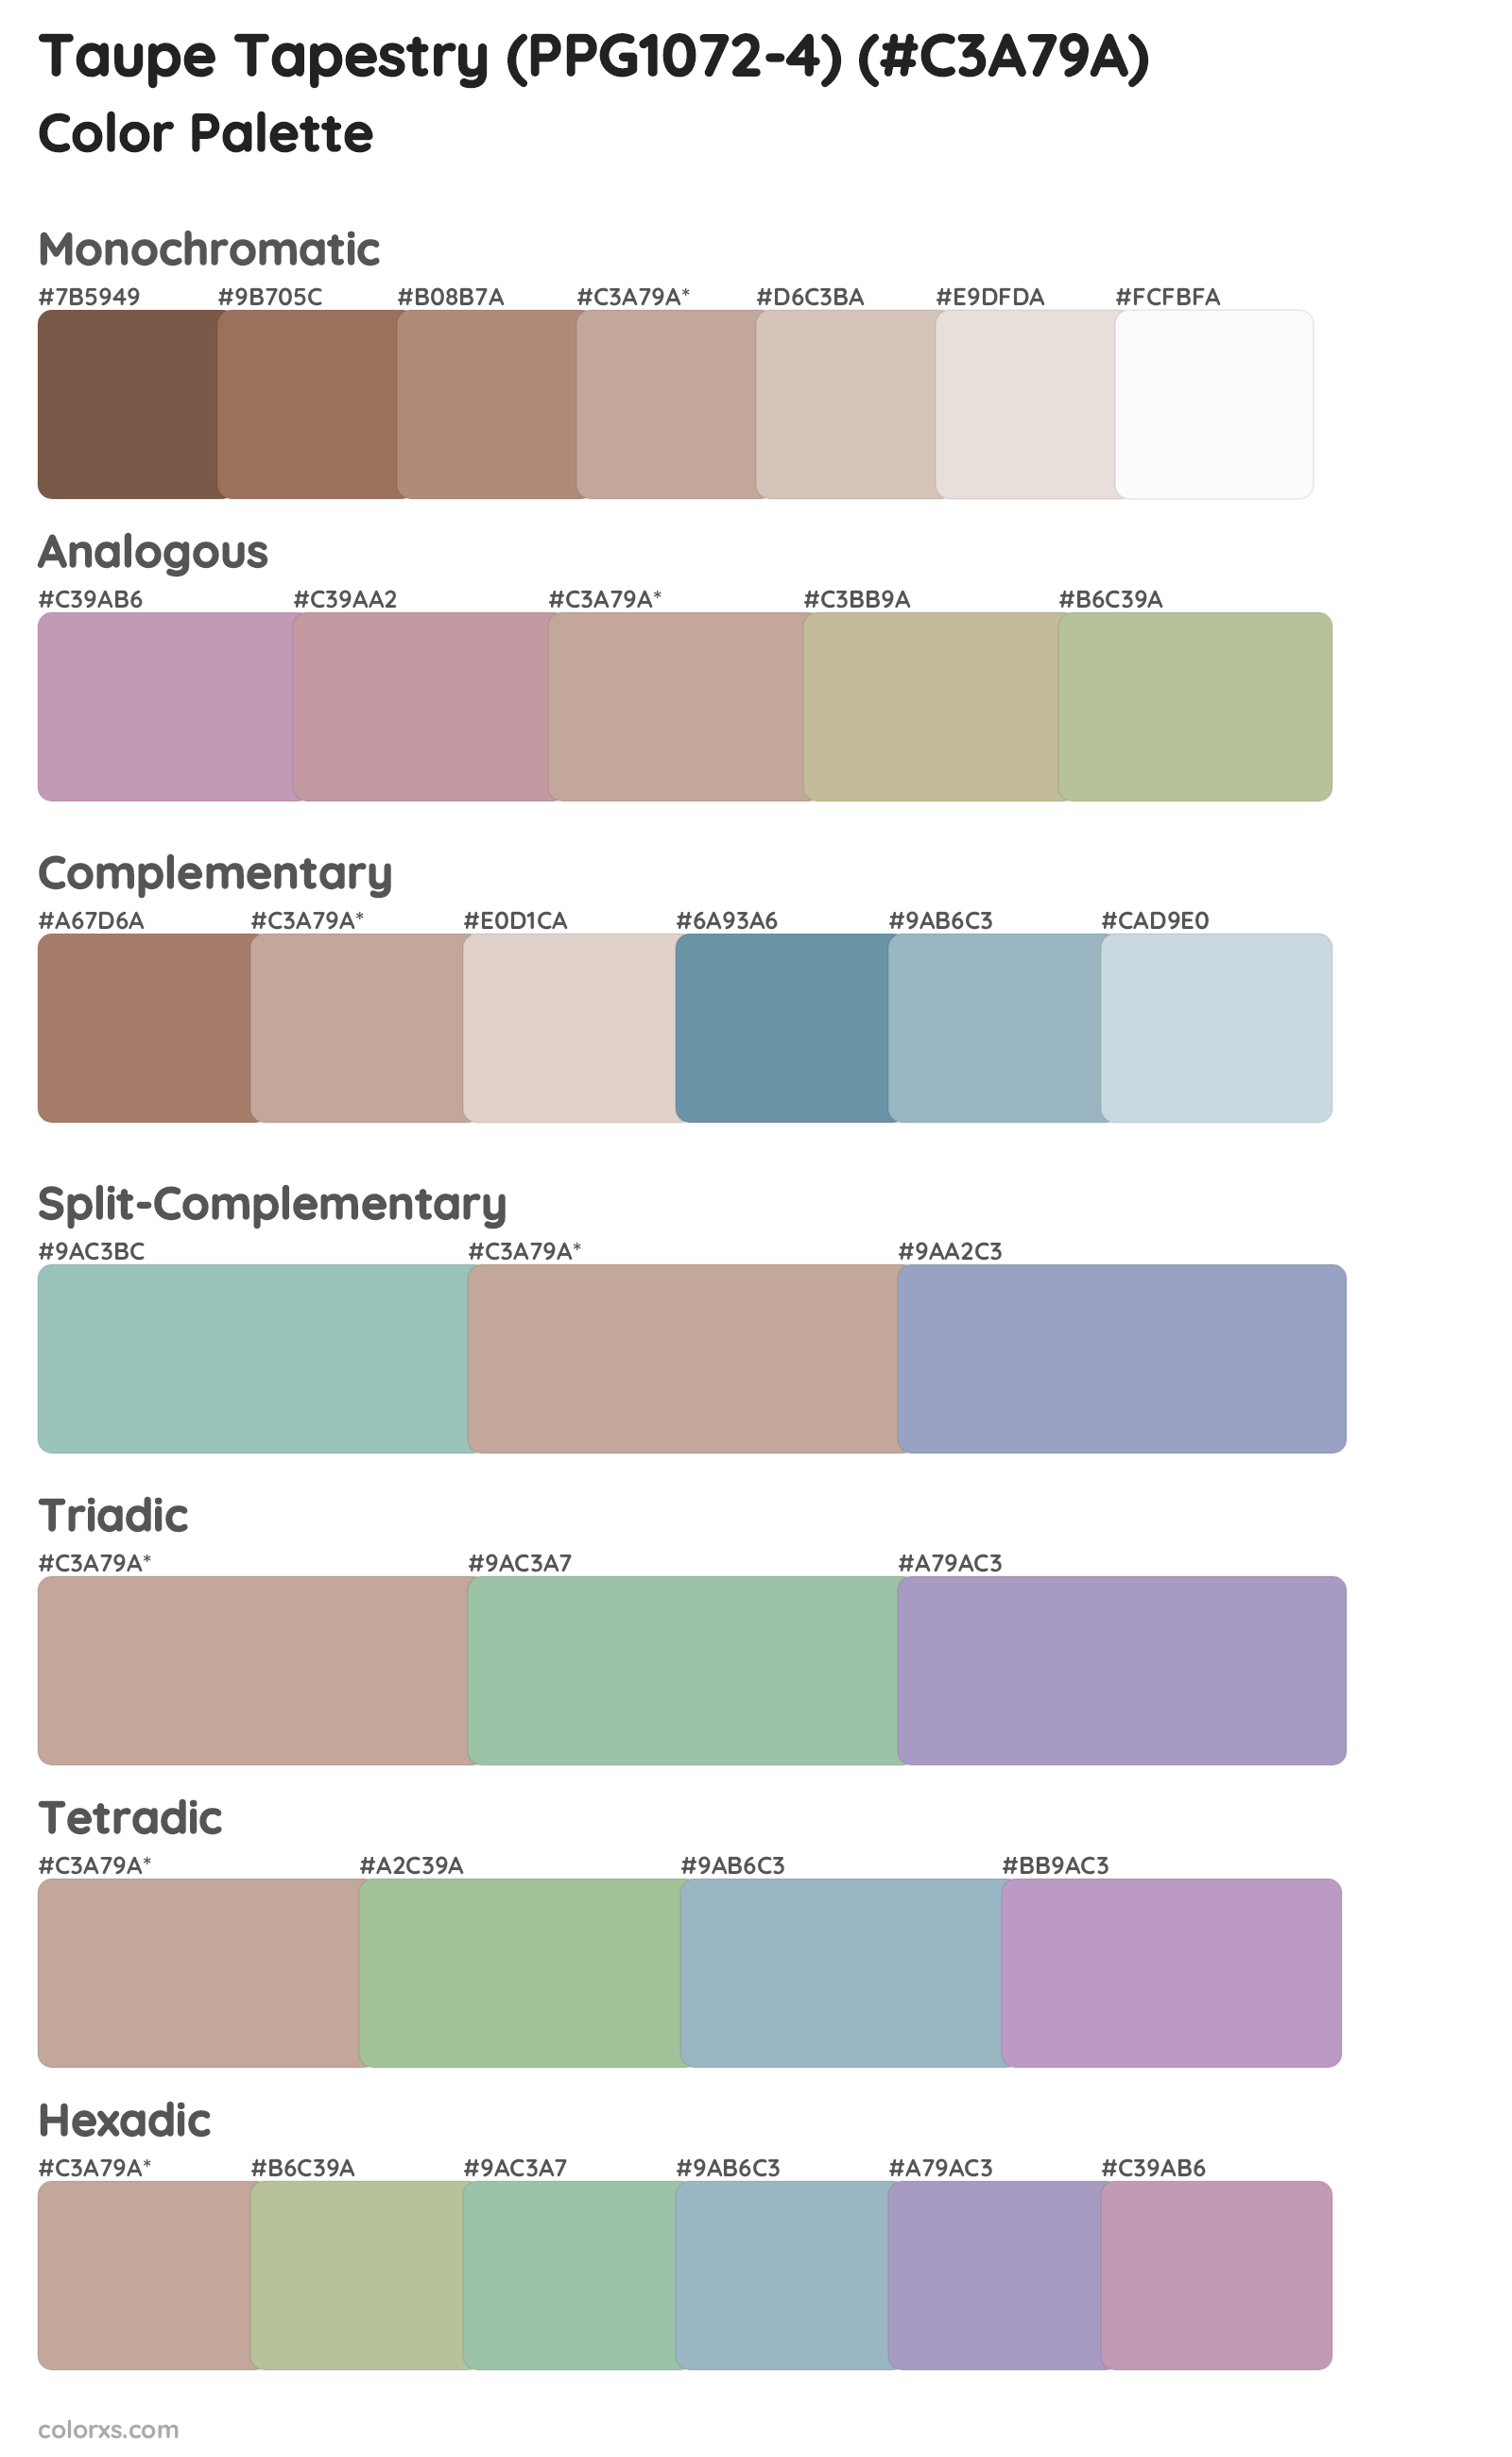 Taupe Tapestry (PPG1072-4) Color Scheme Palettes